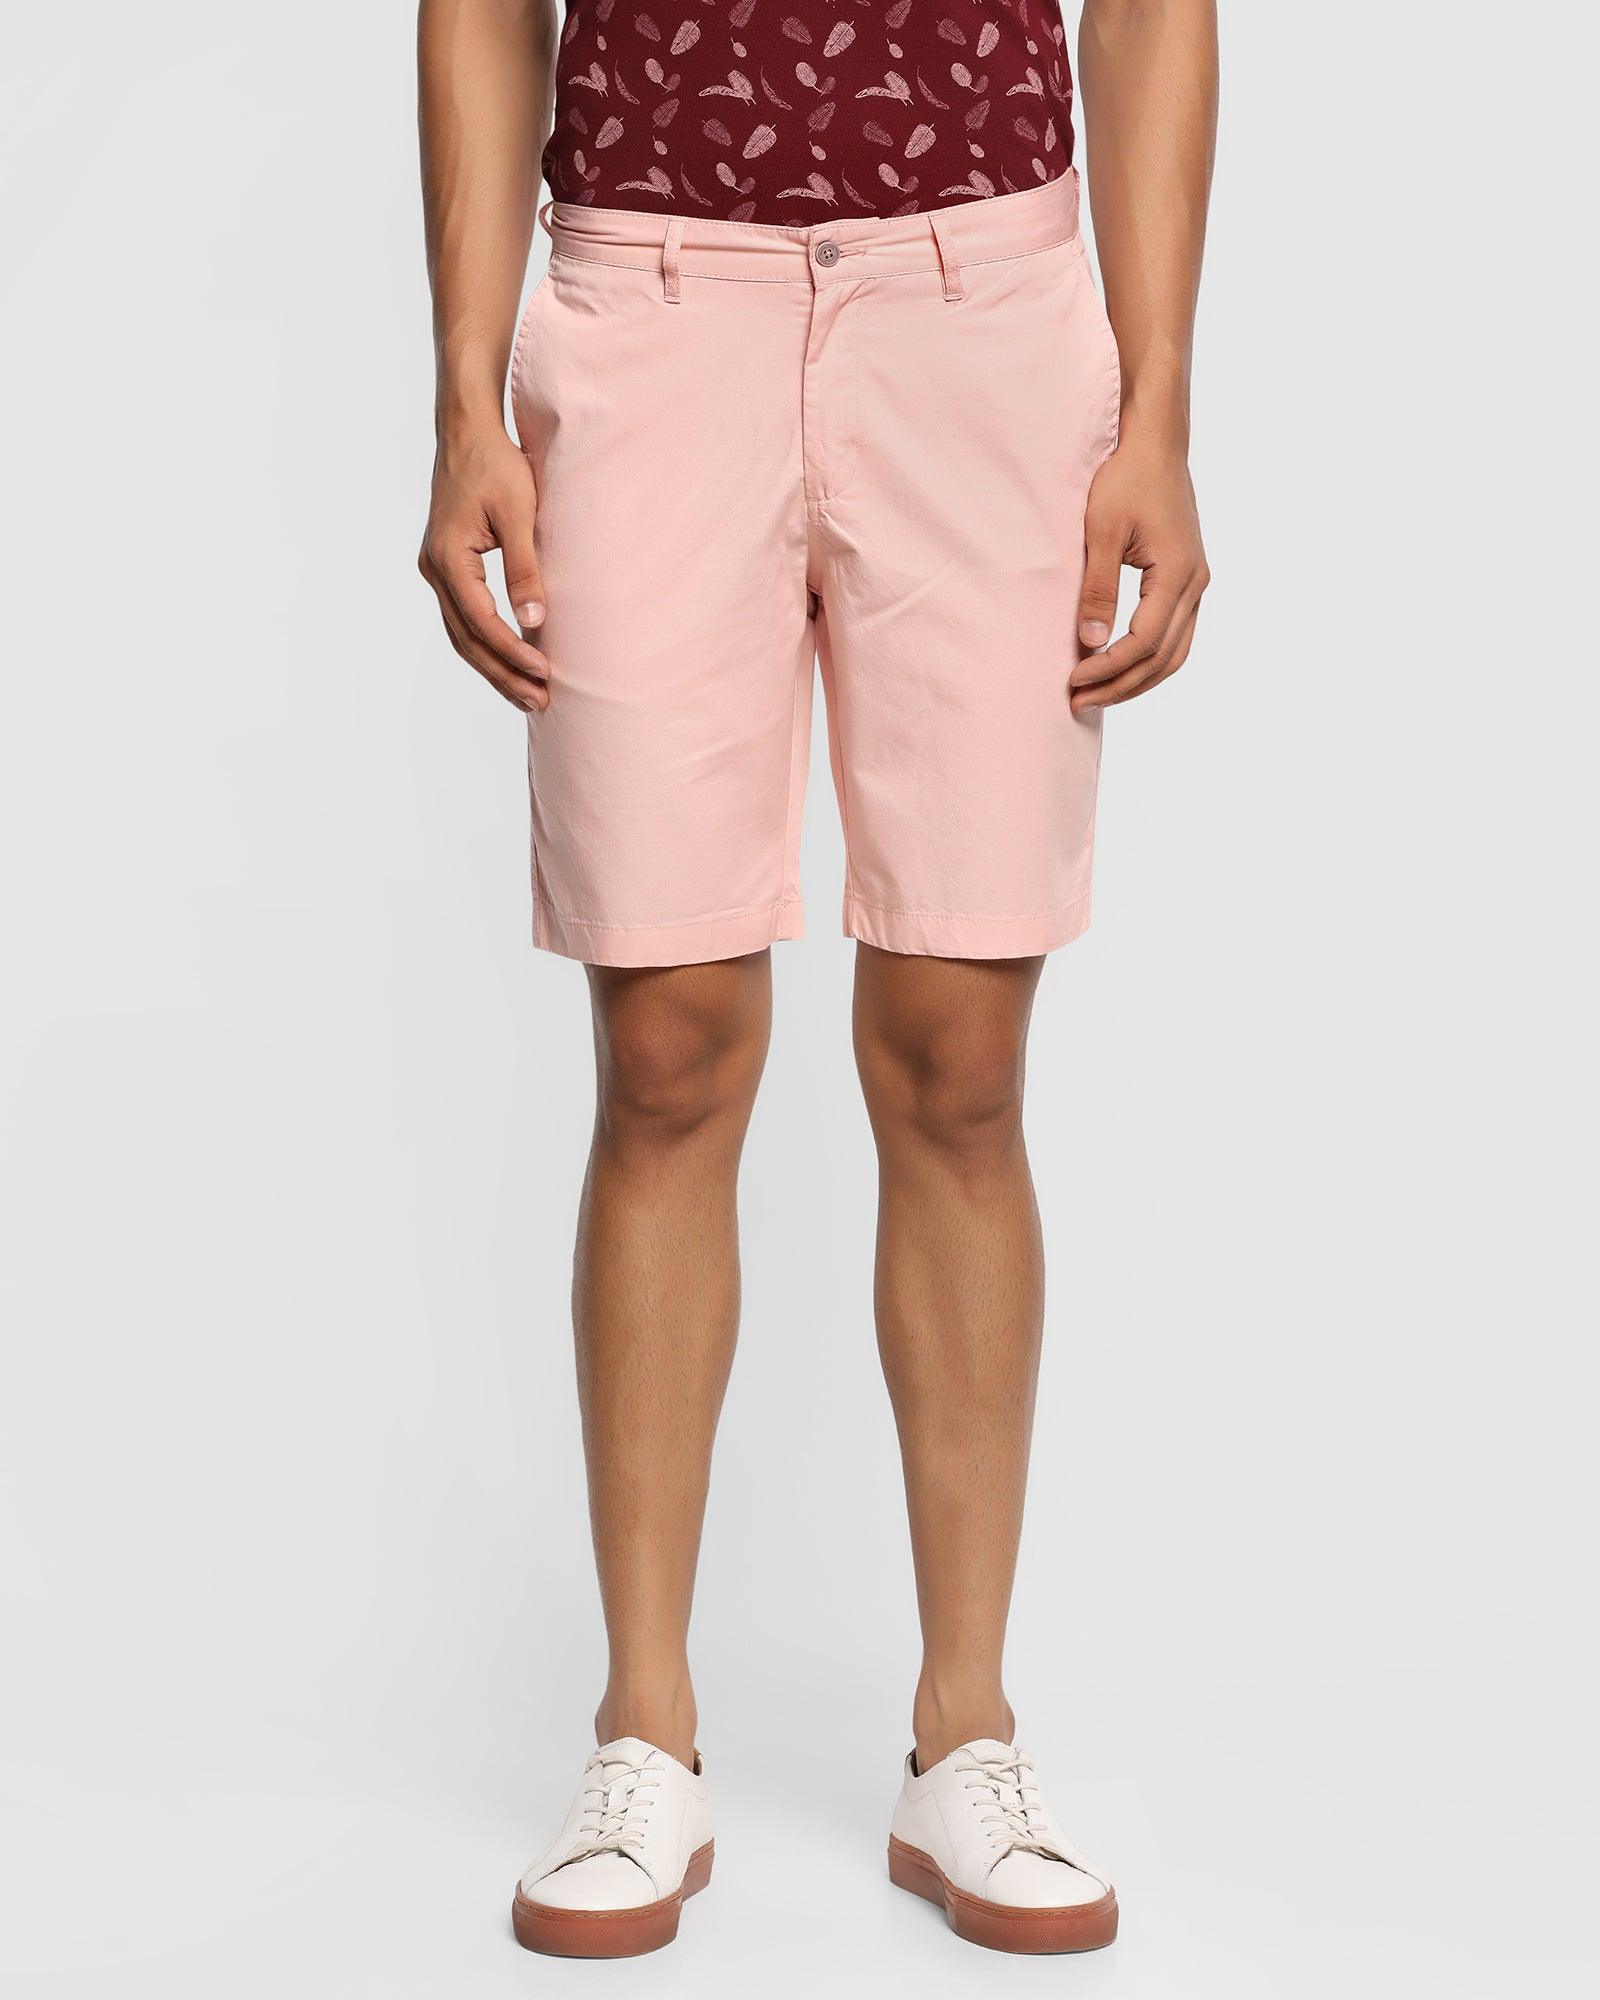 Casual Light Pink Solid Shorts - Sam